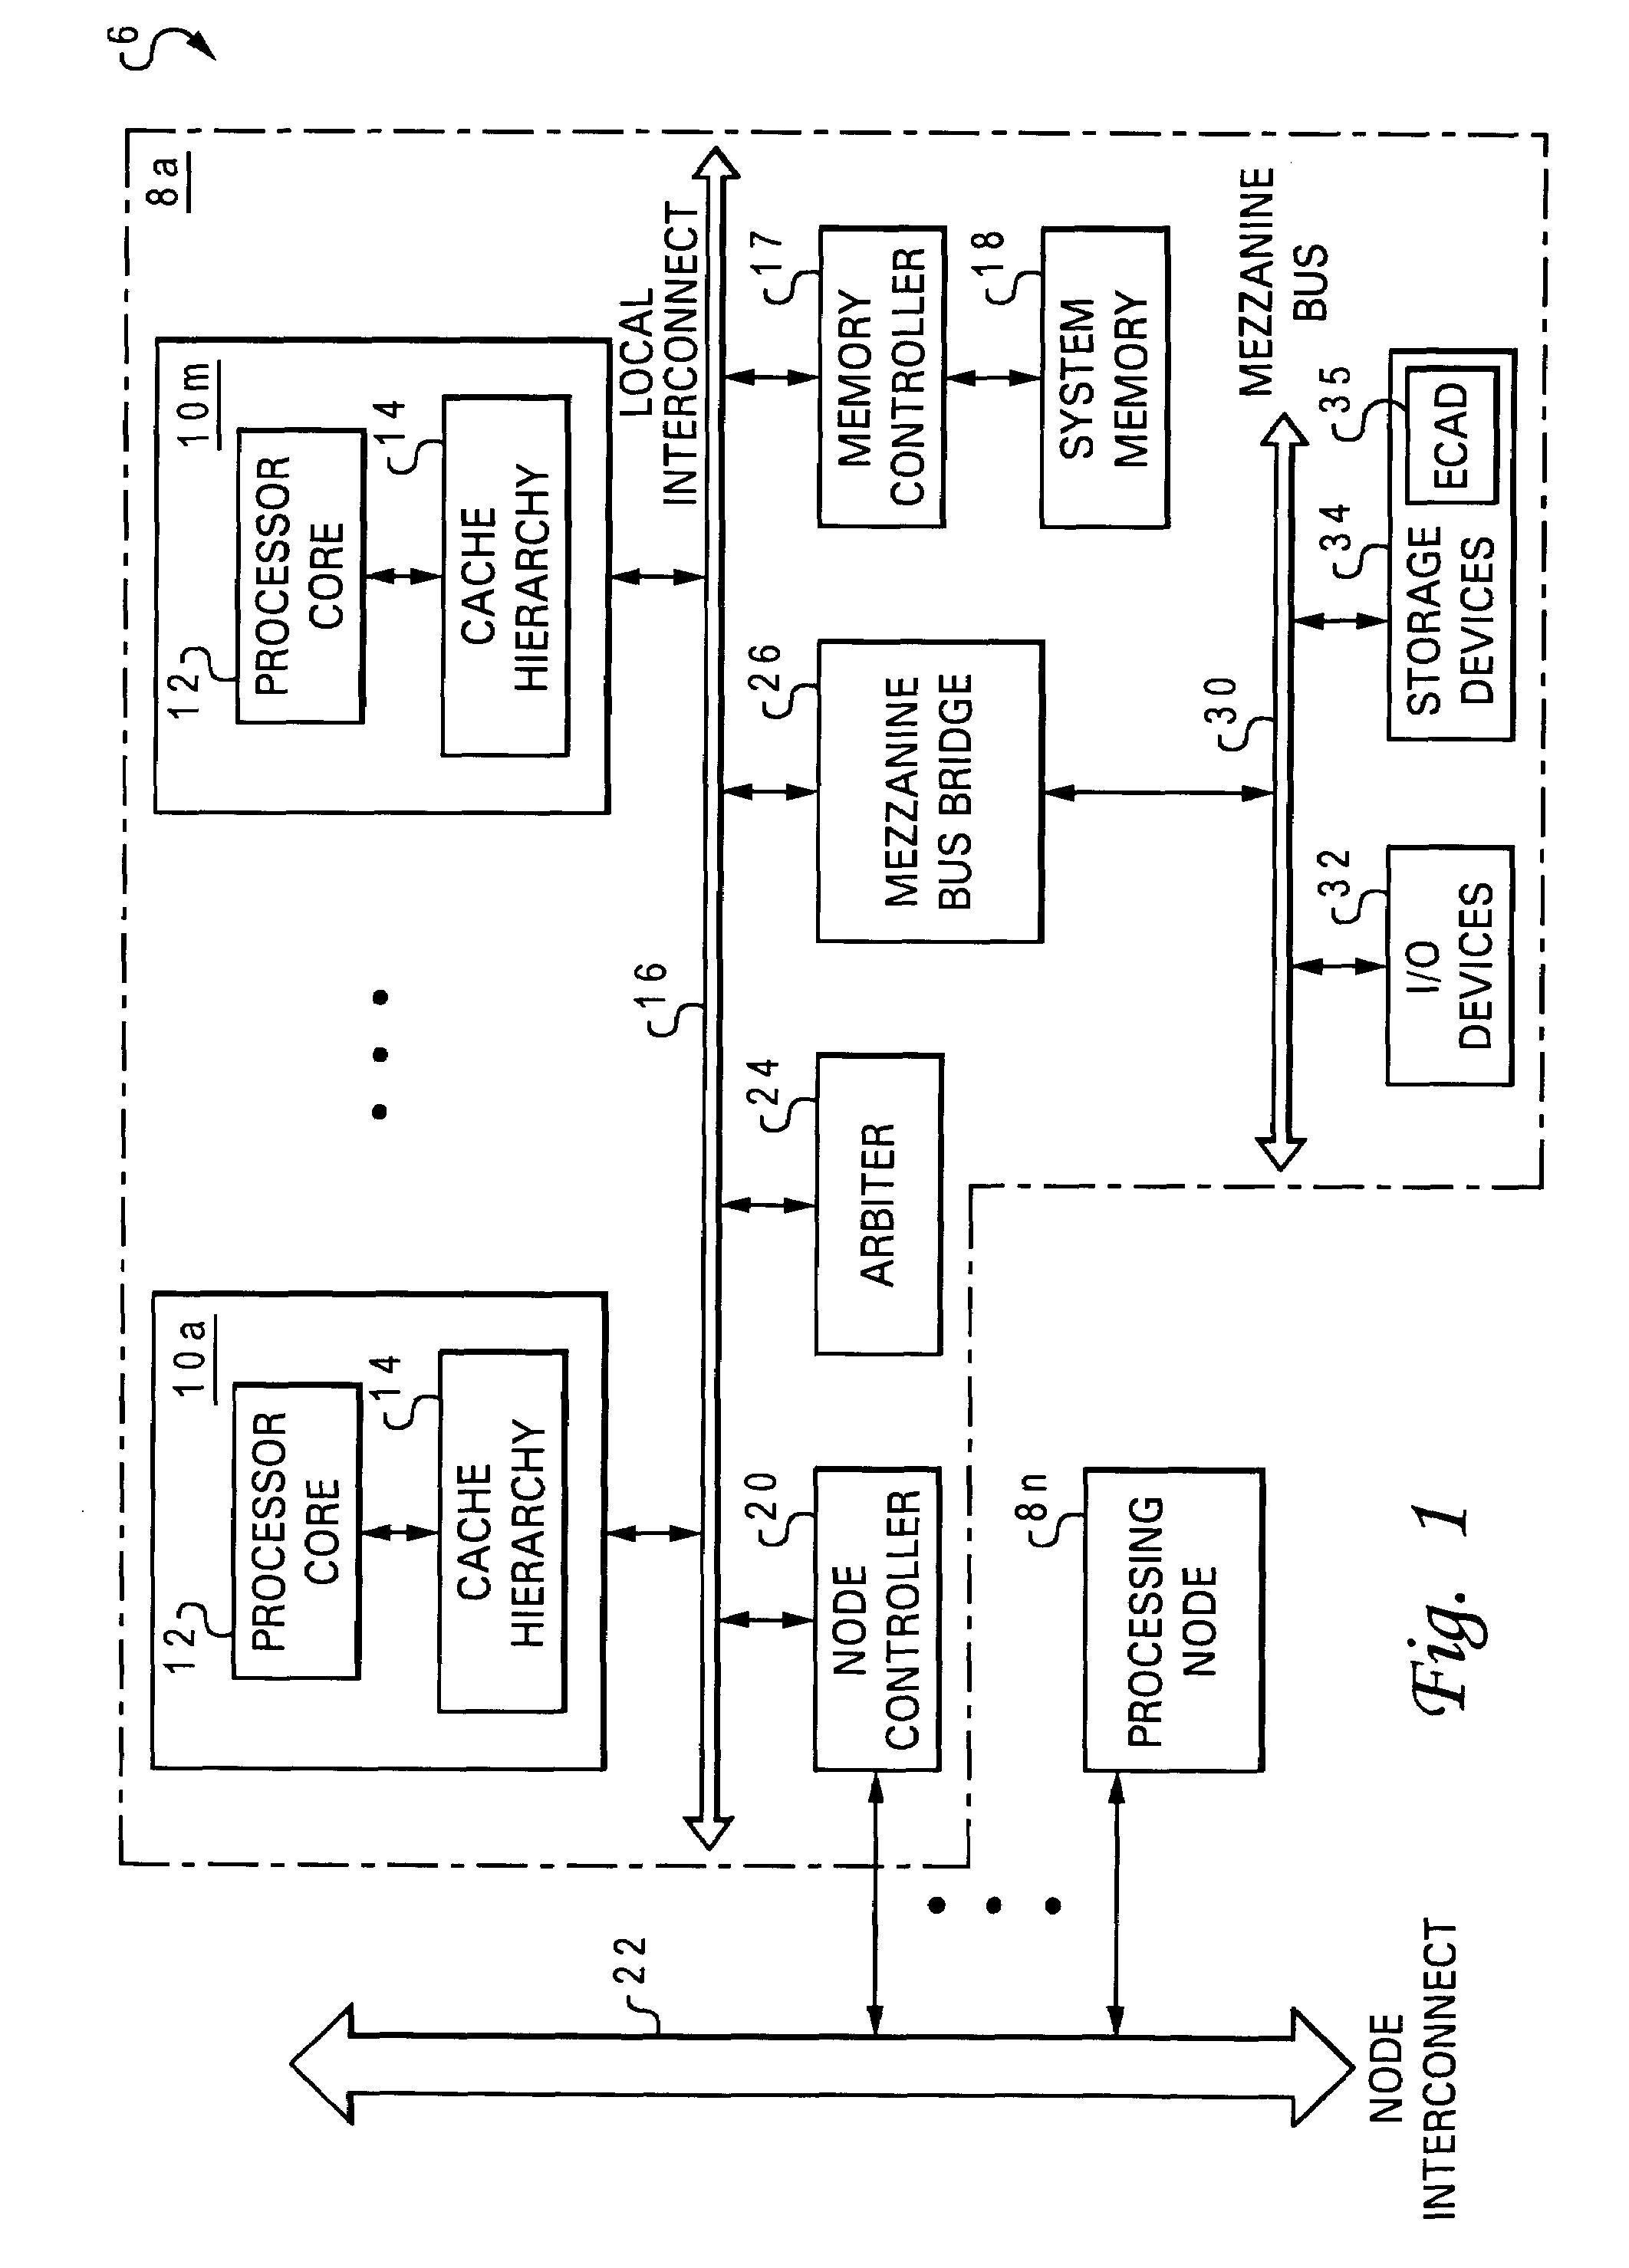 Method, system and program product for specifying a configuration of a digital system described by a hardware description language (HDL) model